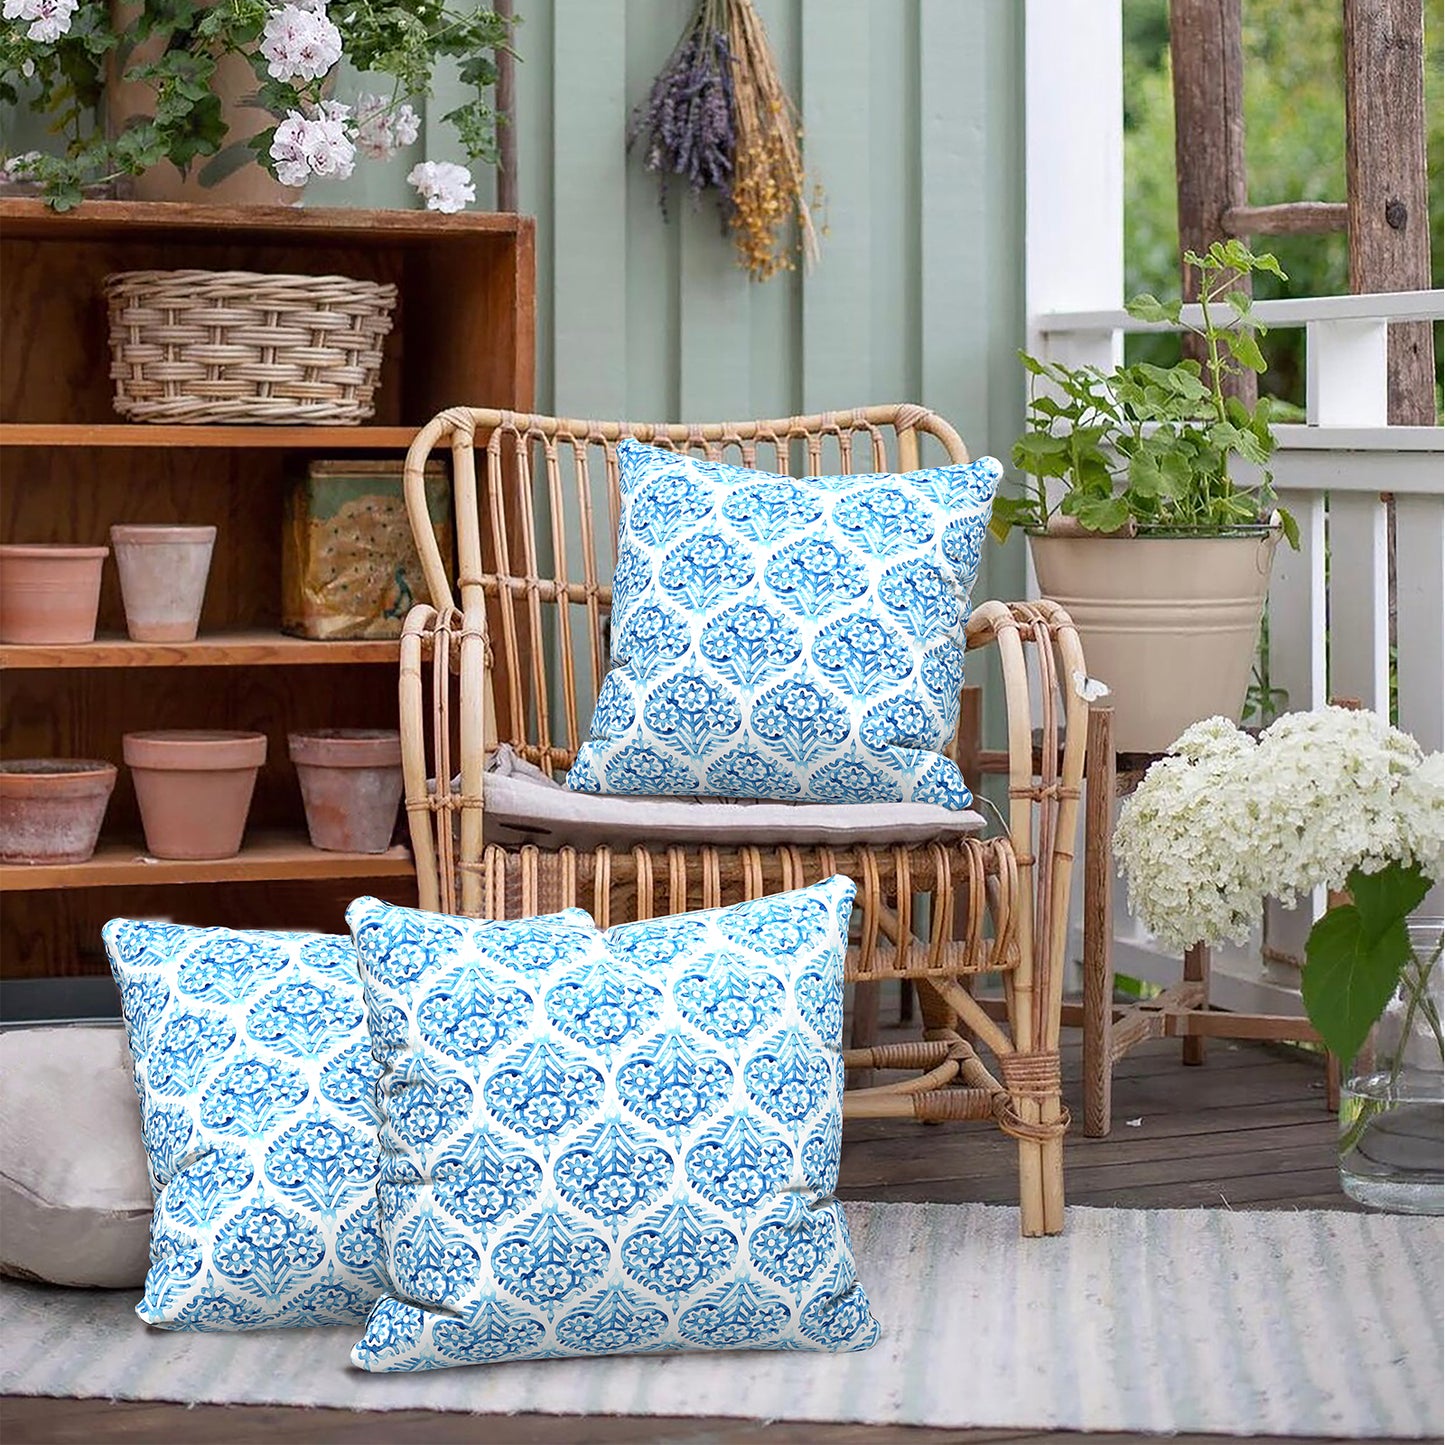 Melody Elephant Outdoor Throw Pillows with Inners, All Weather patio pillows set of 2, Square pillows Decorative for  home garden furniture, 20x20 Inch, Celadon Geometric